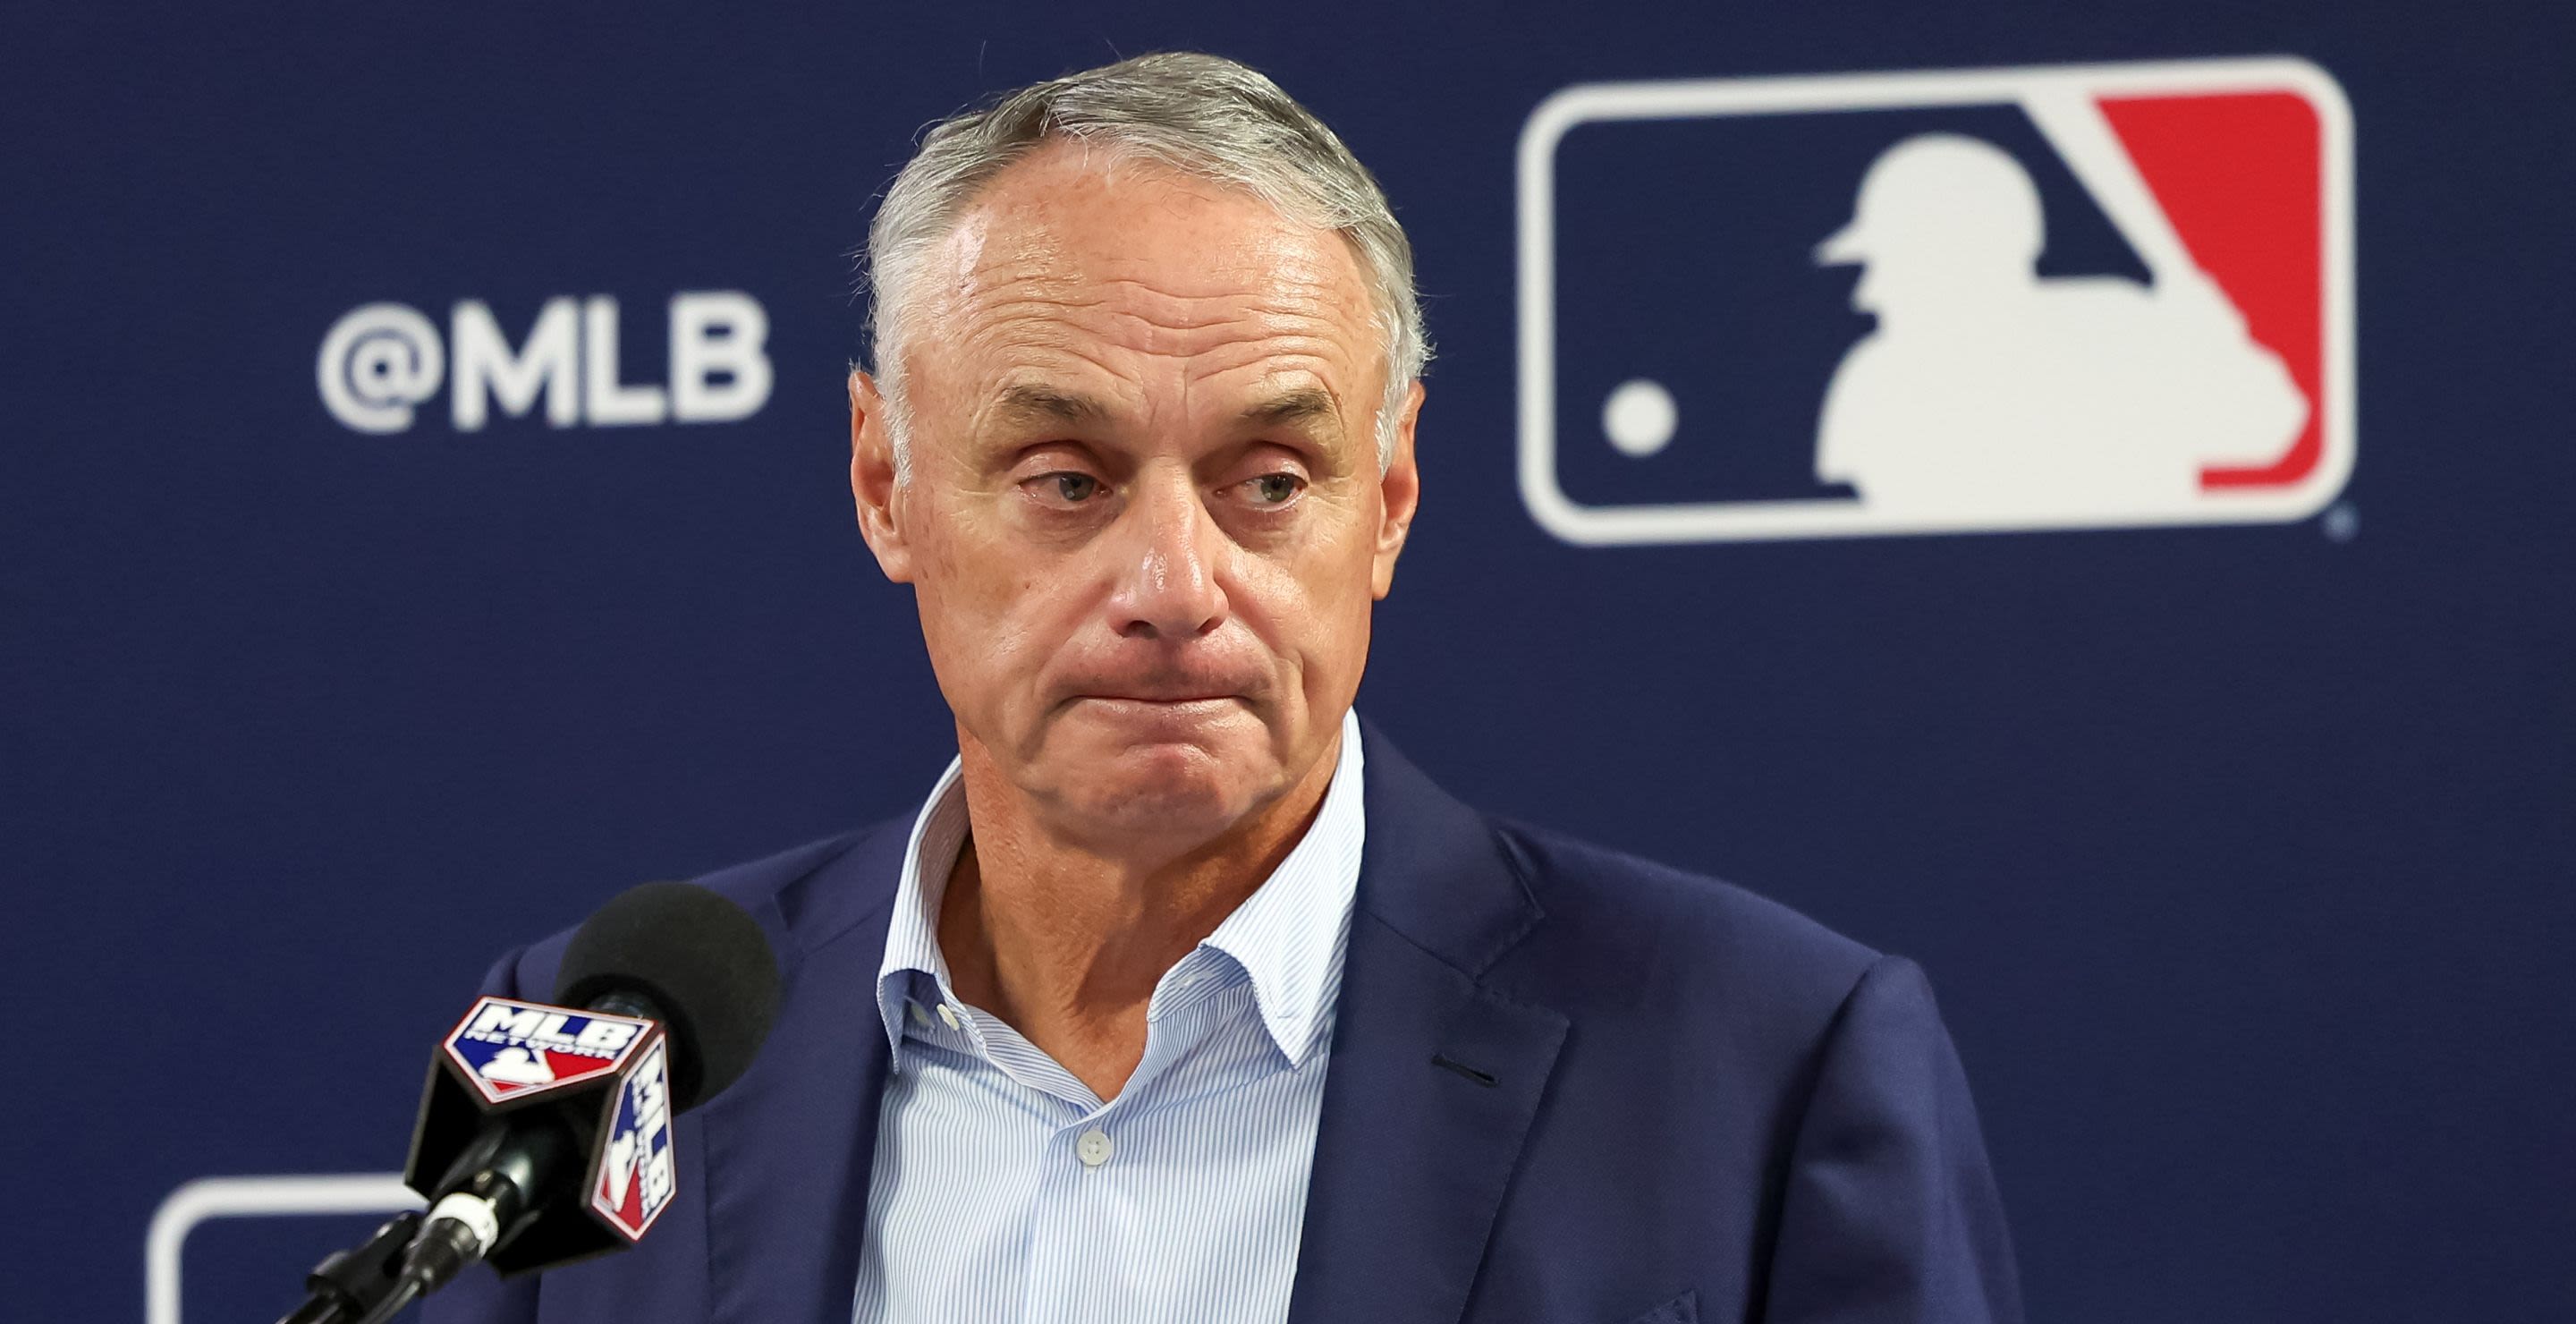 MLB Commissioner Rob Manfred: Playing Baseball Comes With Responsibility